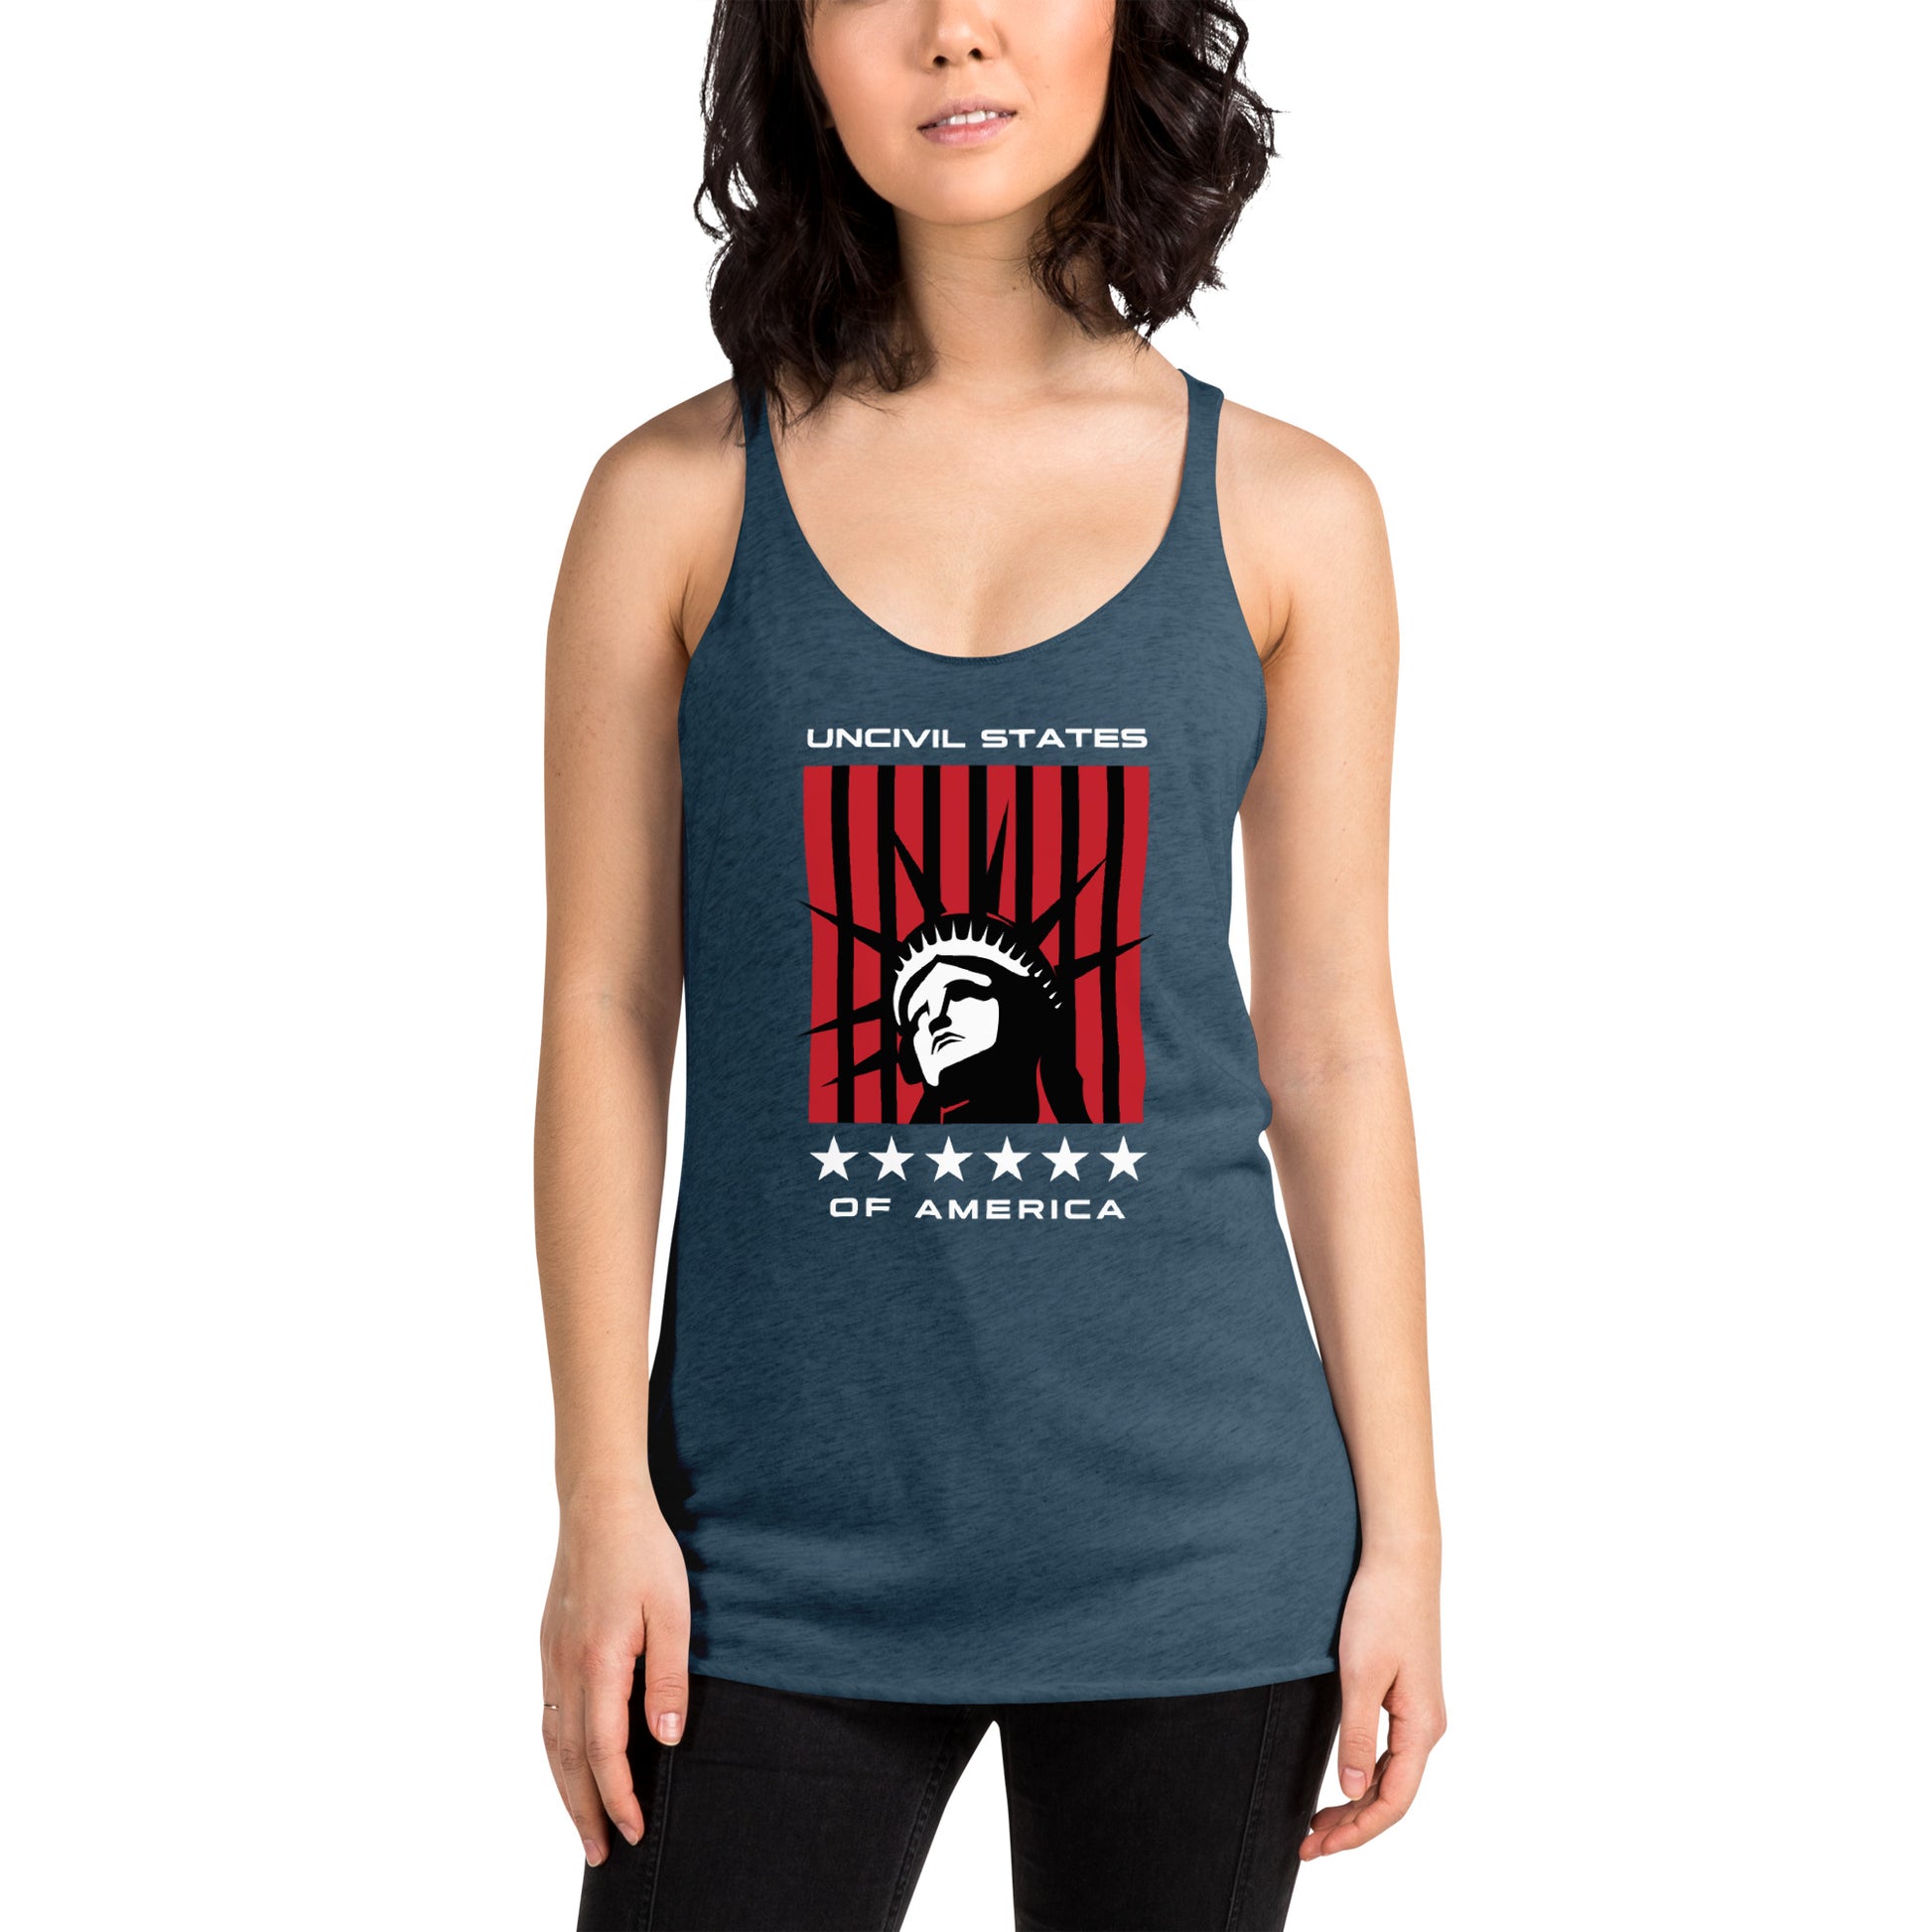 Disrupt the ordinary with our UNCIVIL States of America racerback tank - a soft, lightweight, and form-fitting with a flattering cut and raw edge seams for an edgy touch. Vintage Blue women's tank top.